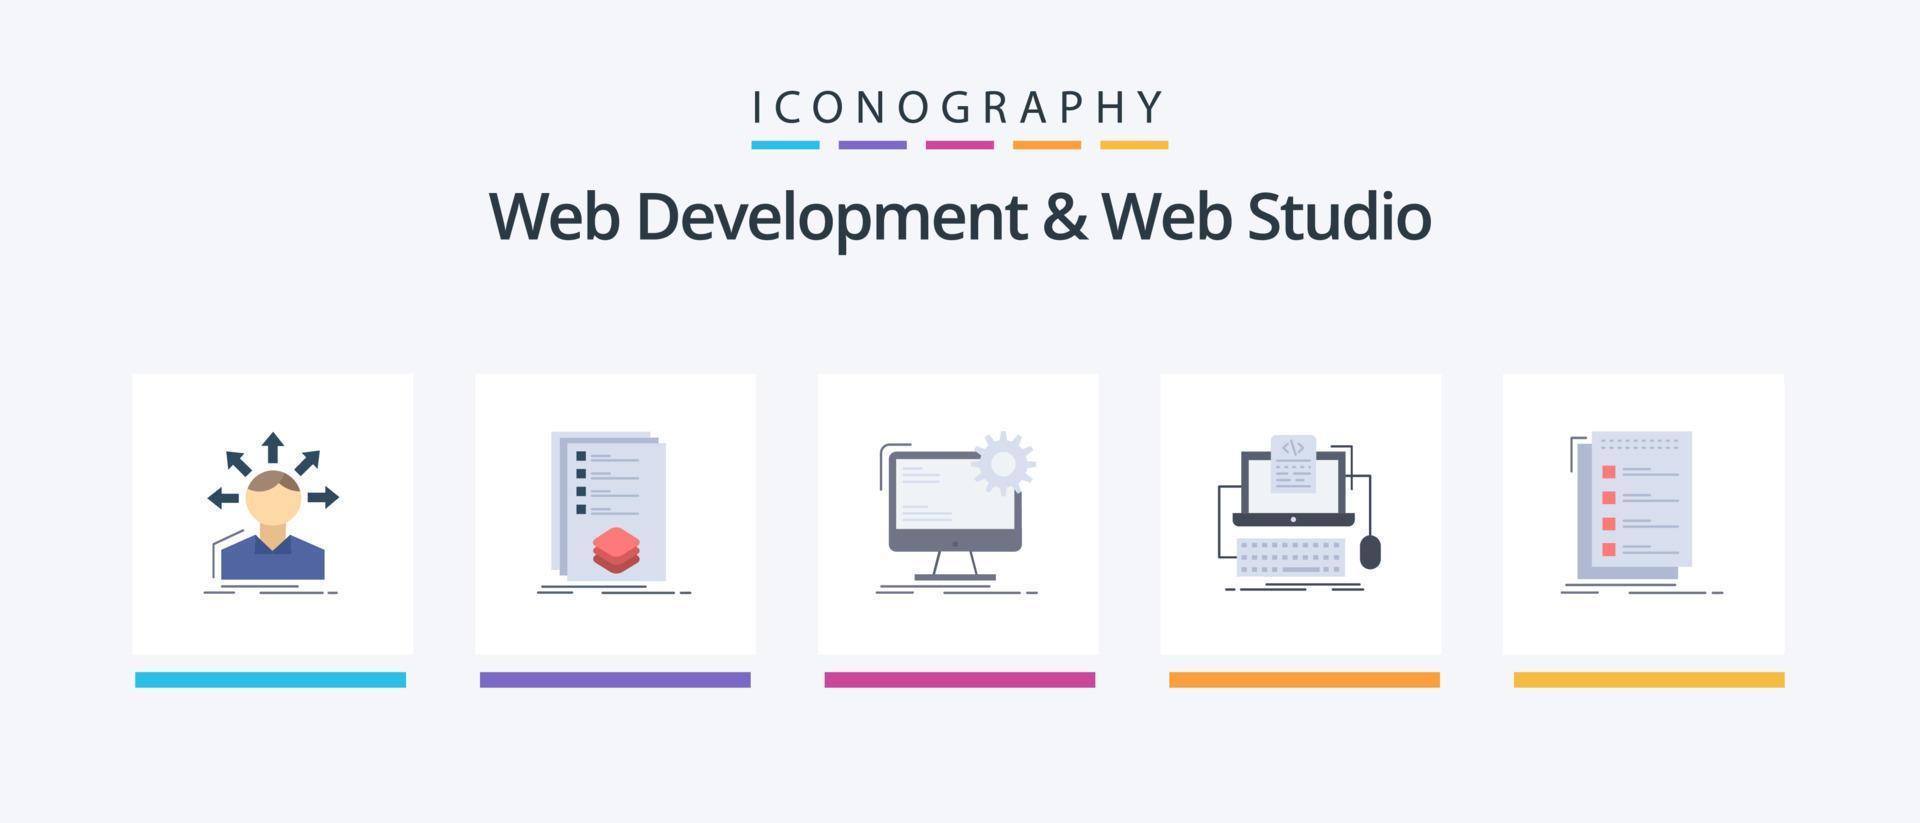 Web Development And Web Studio Flat 5 Icon Pack Including computer. code. listing. static. page. Creative Icons Design vector